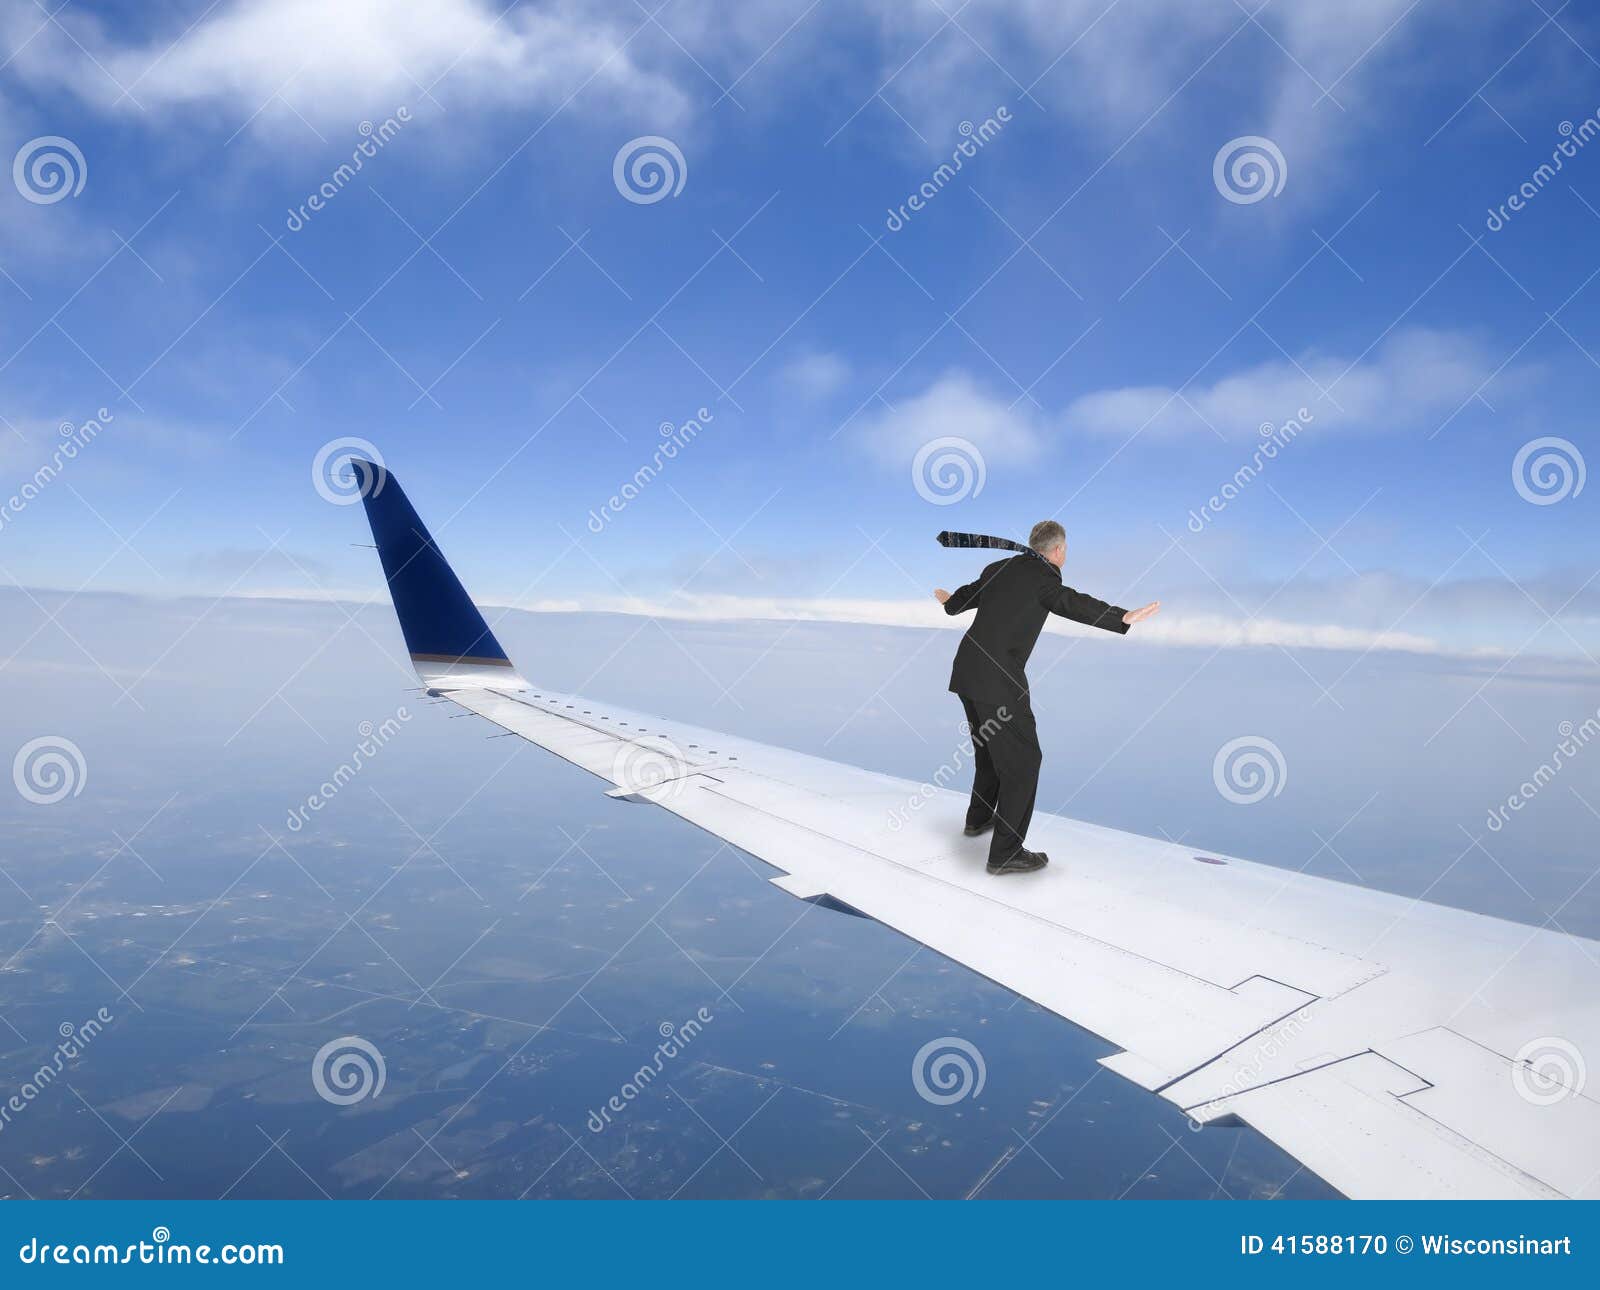 business travel concept, businessman flying on jet plane wing, trip